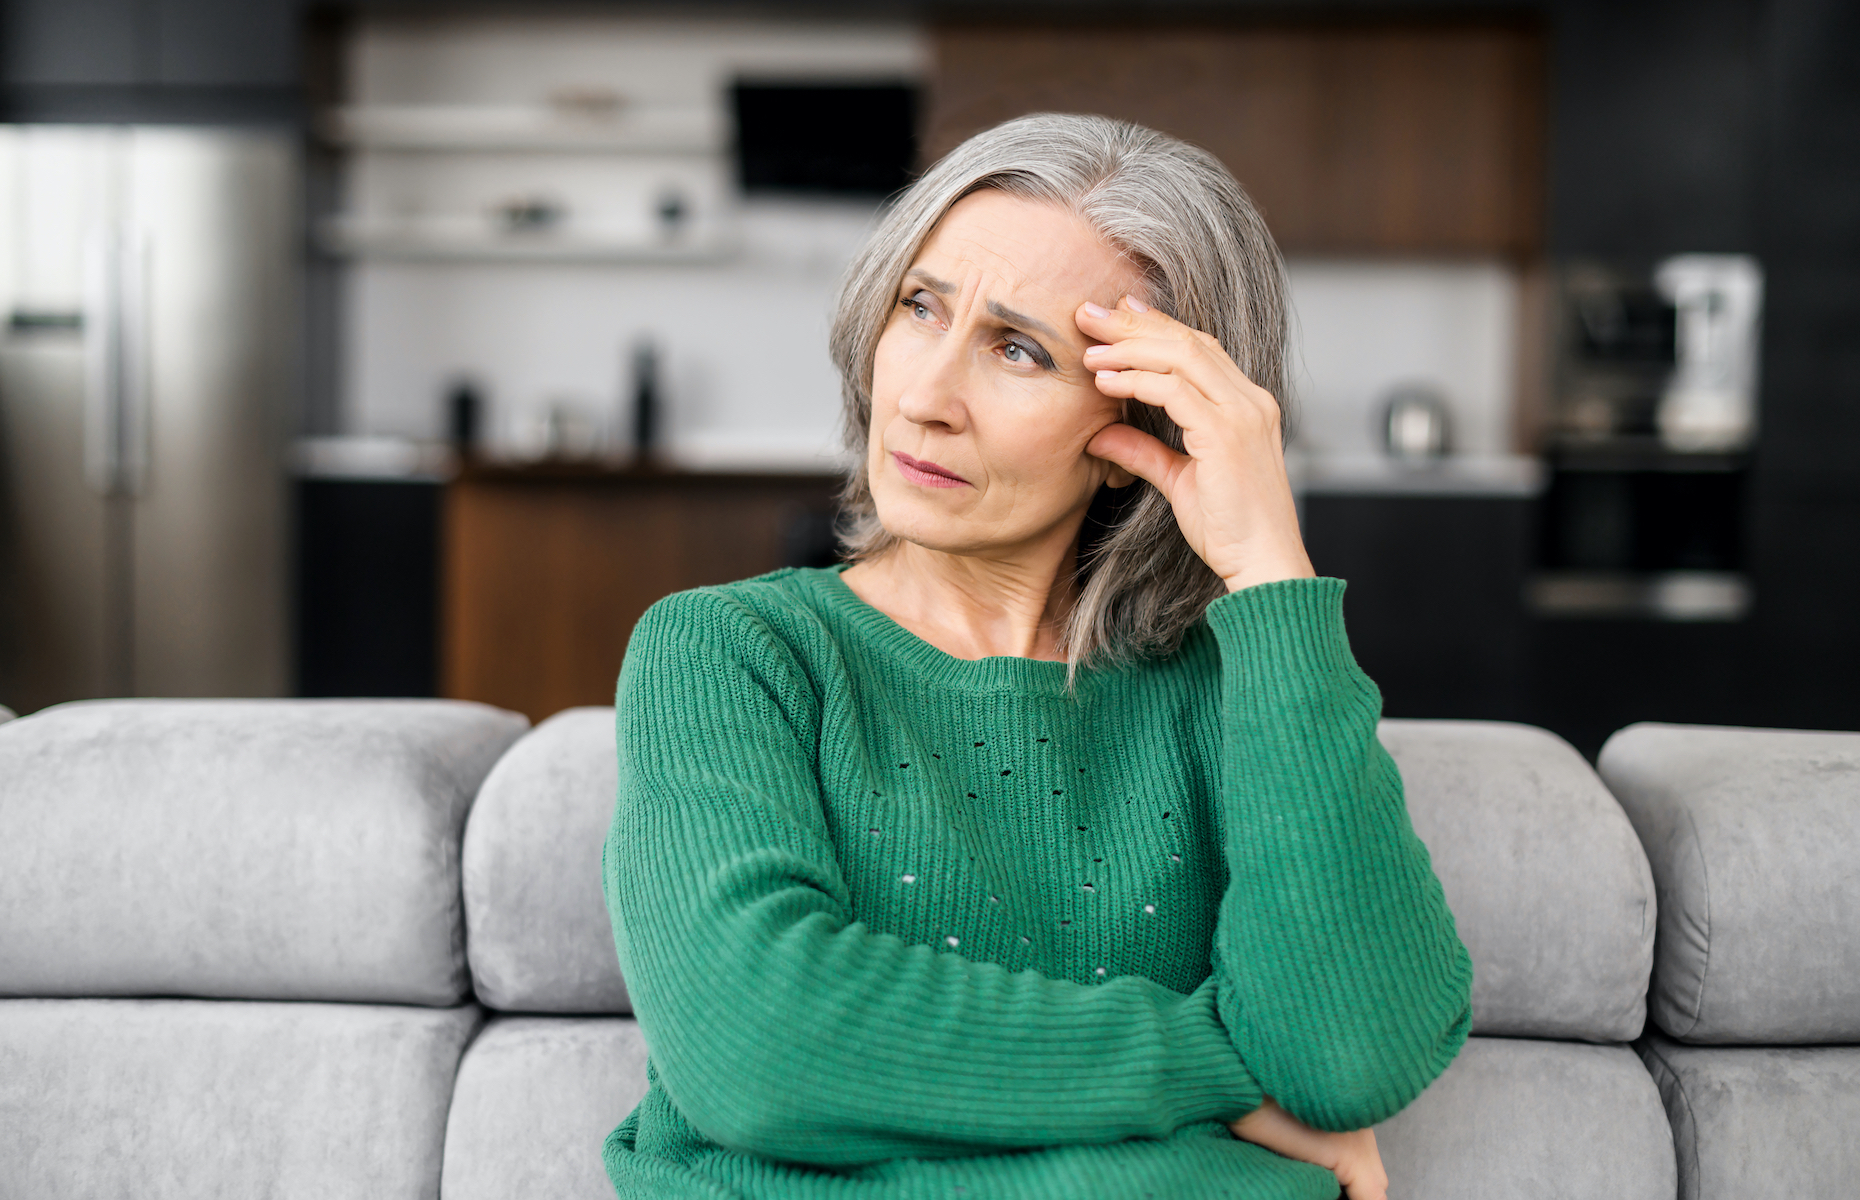 Post-retirement depression: recognizing the signs